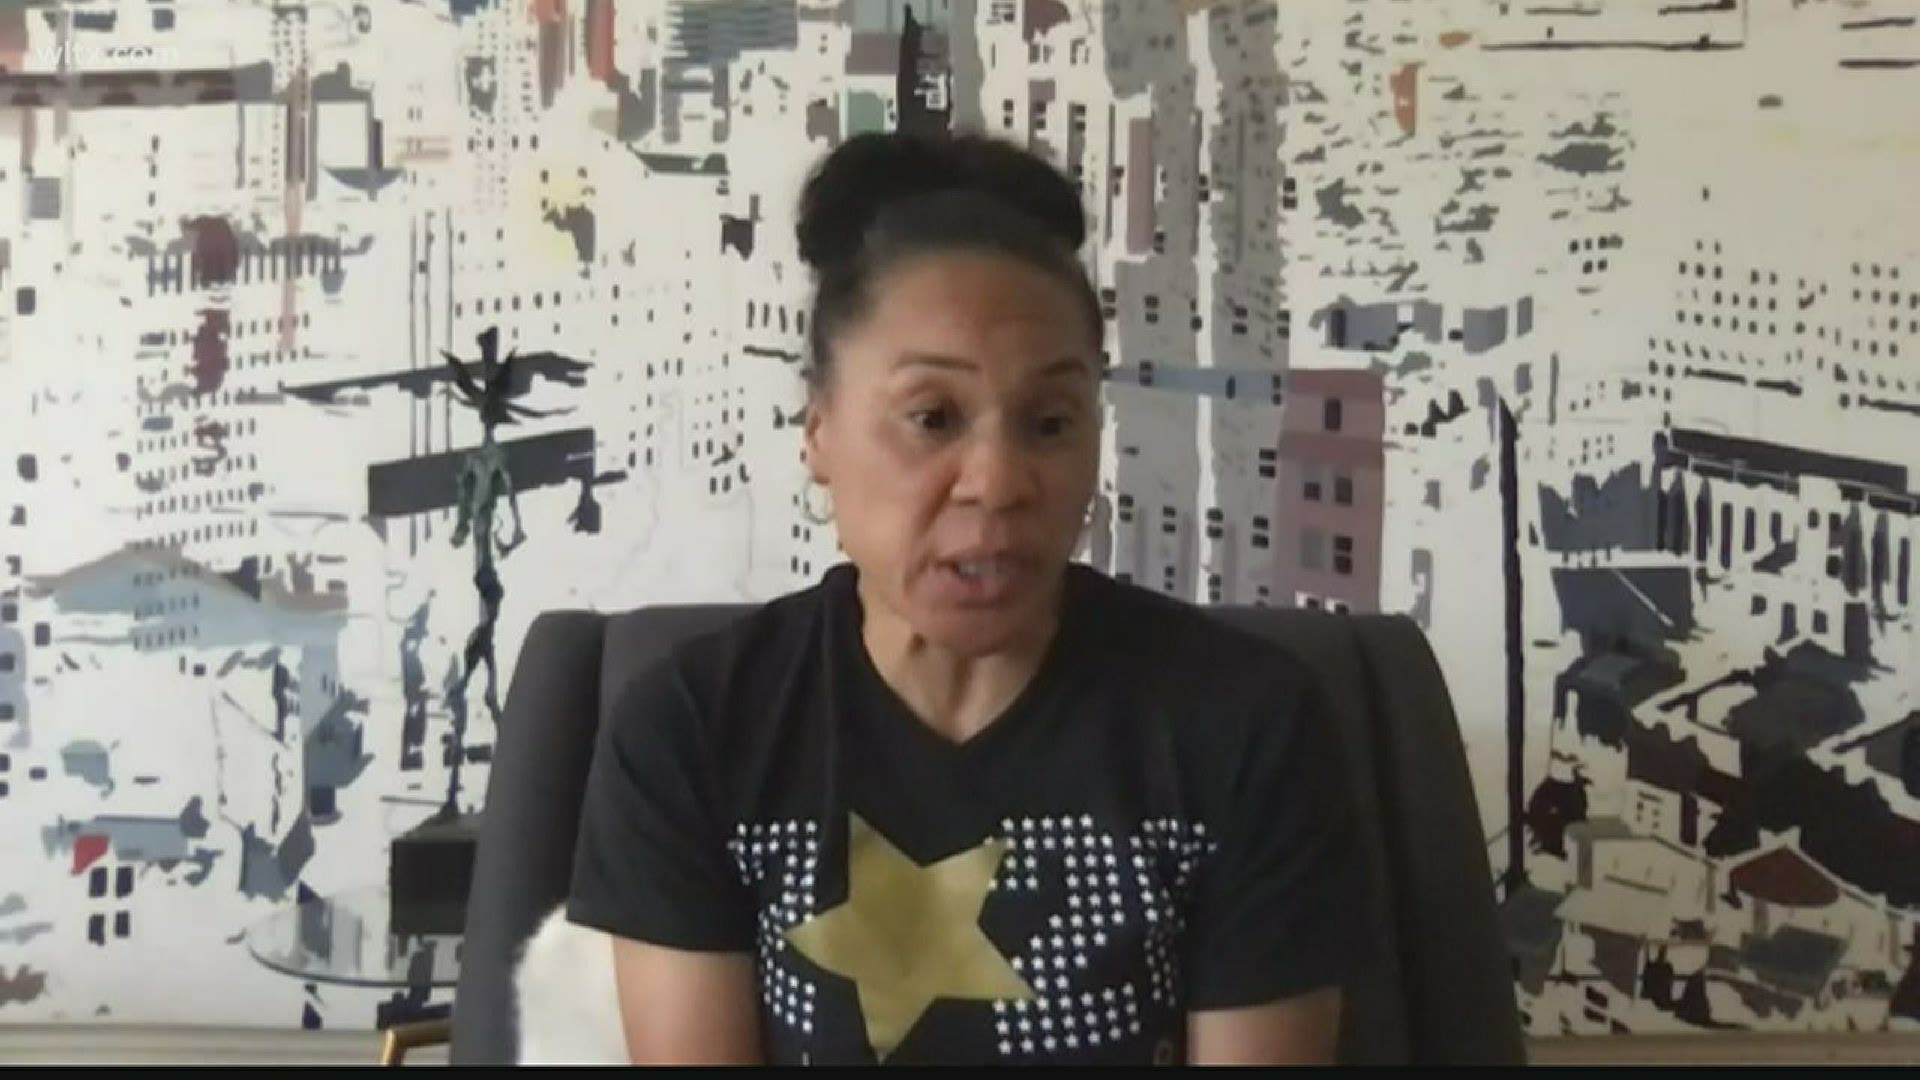 USC women's head basketball coach Dawn Staley talks about protests and law enforcement